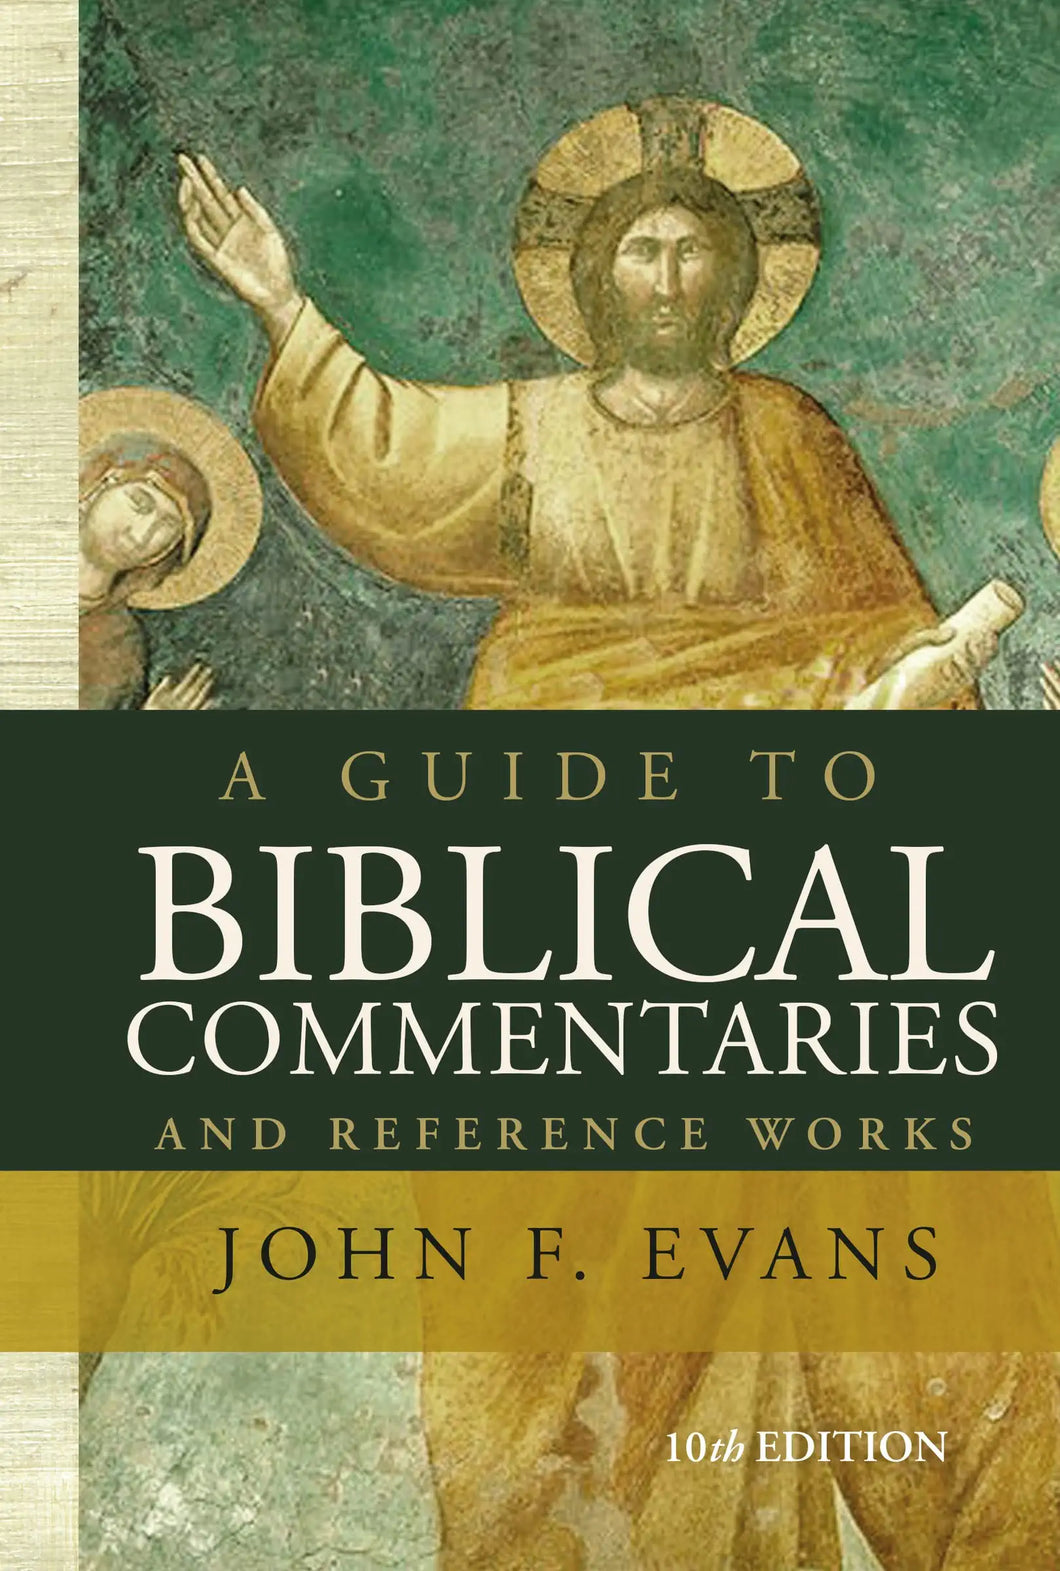 A GUIDE TO BIBLICAL COMMENTARIES AND REFERENCE WORKS 10TH EDITION